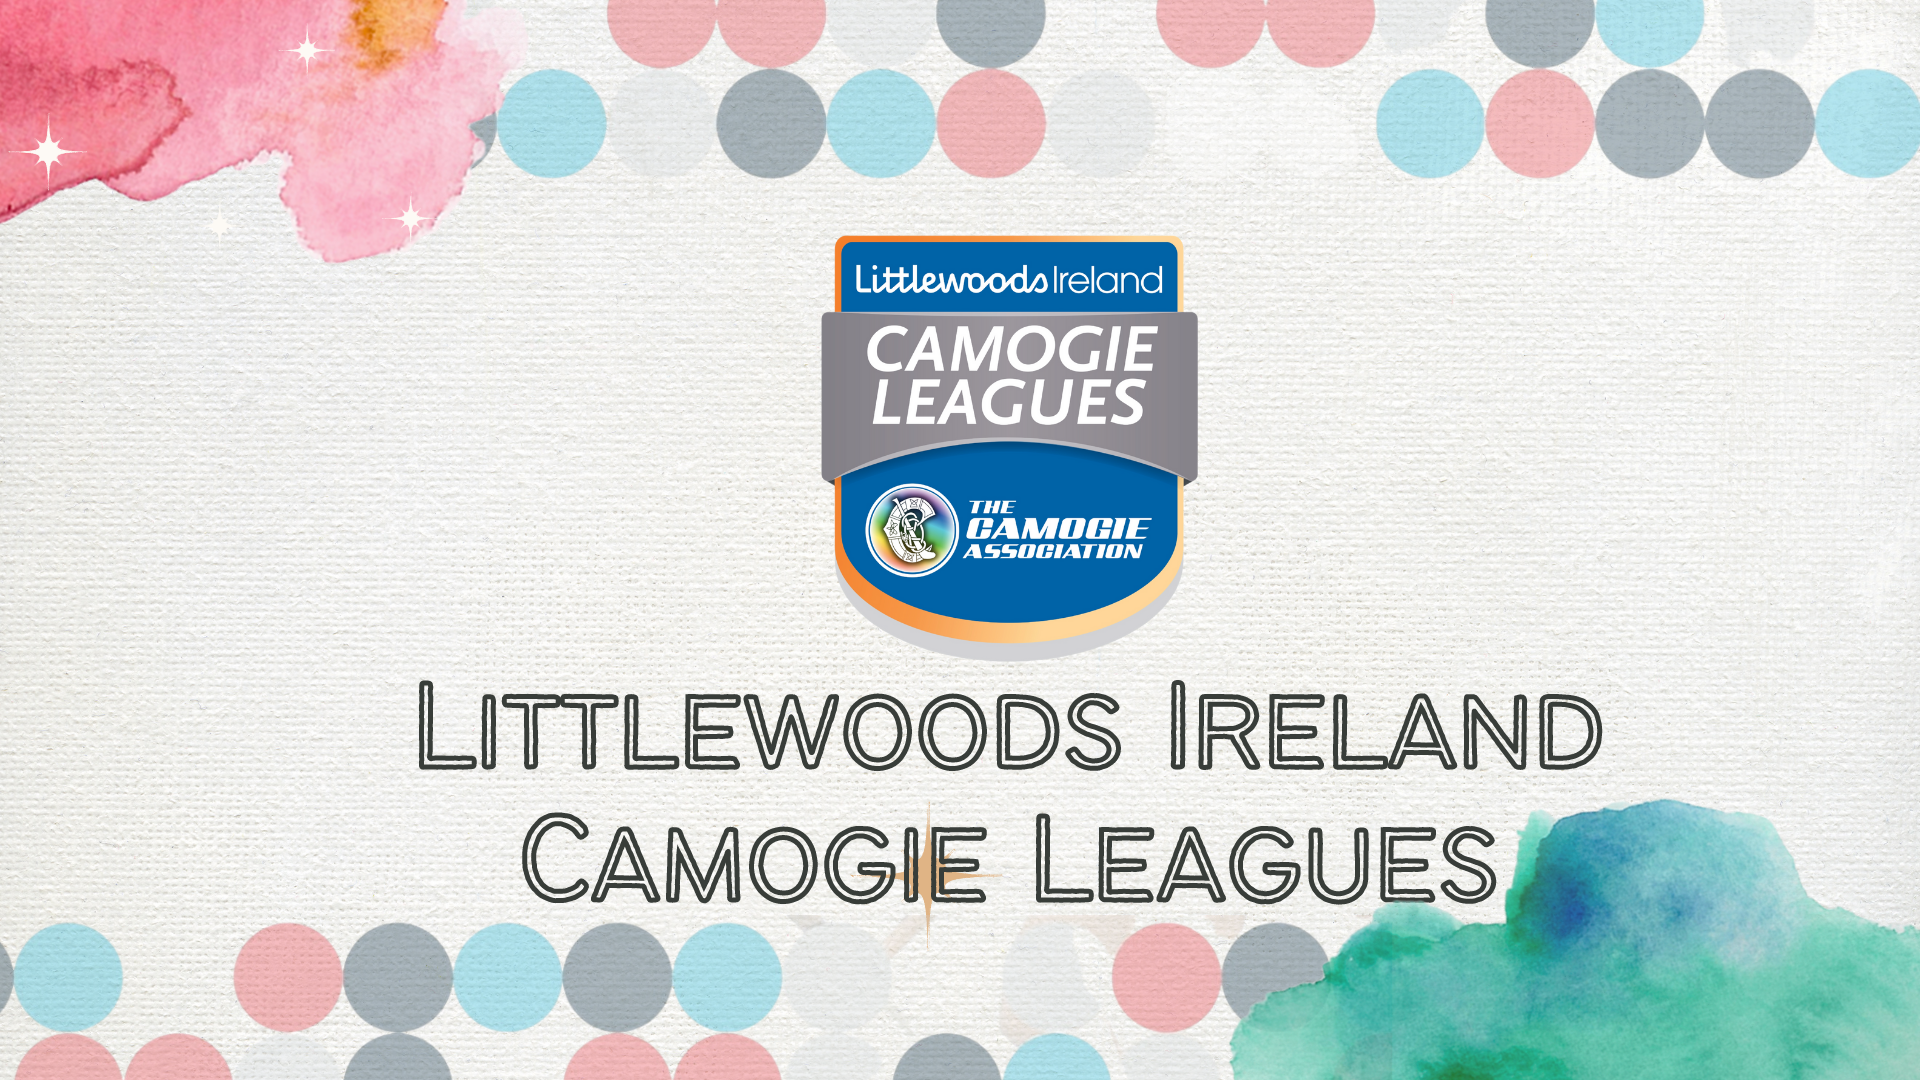 FIXTURES: Littlewoods Ireland Camogie Leagues, 5th & 6th February